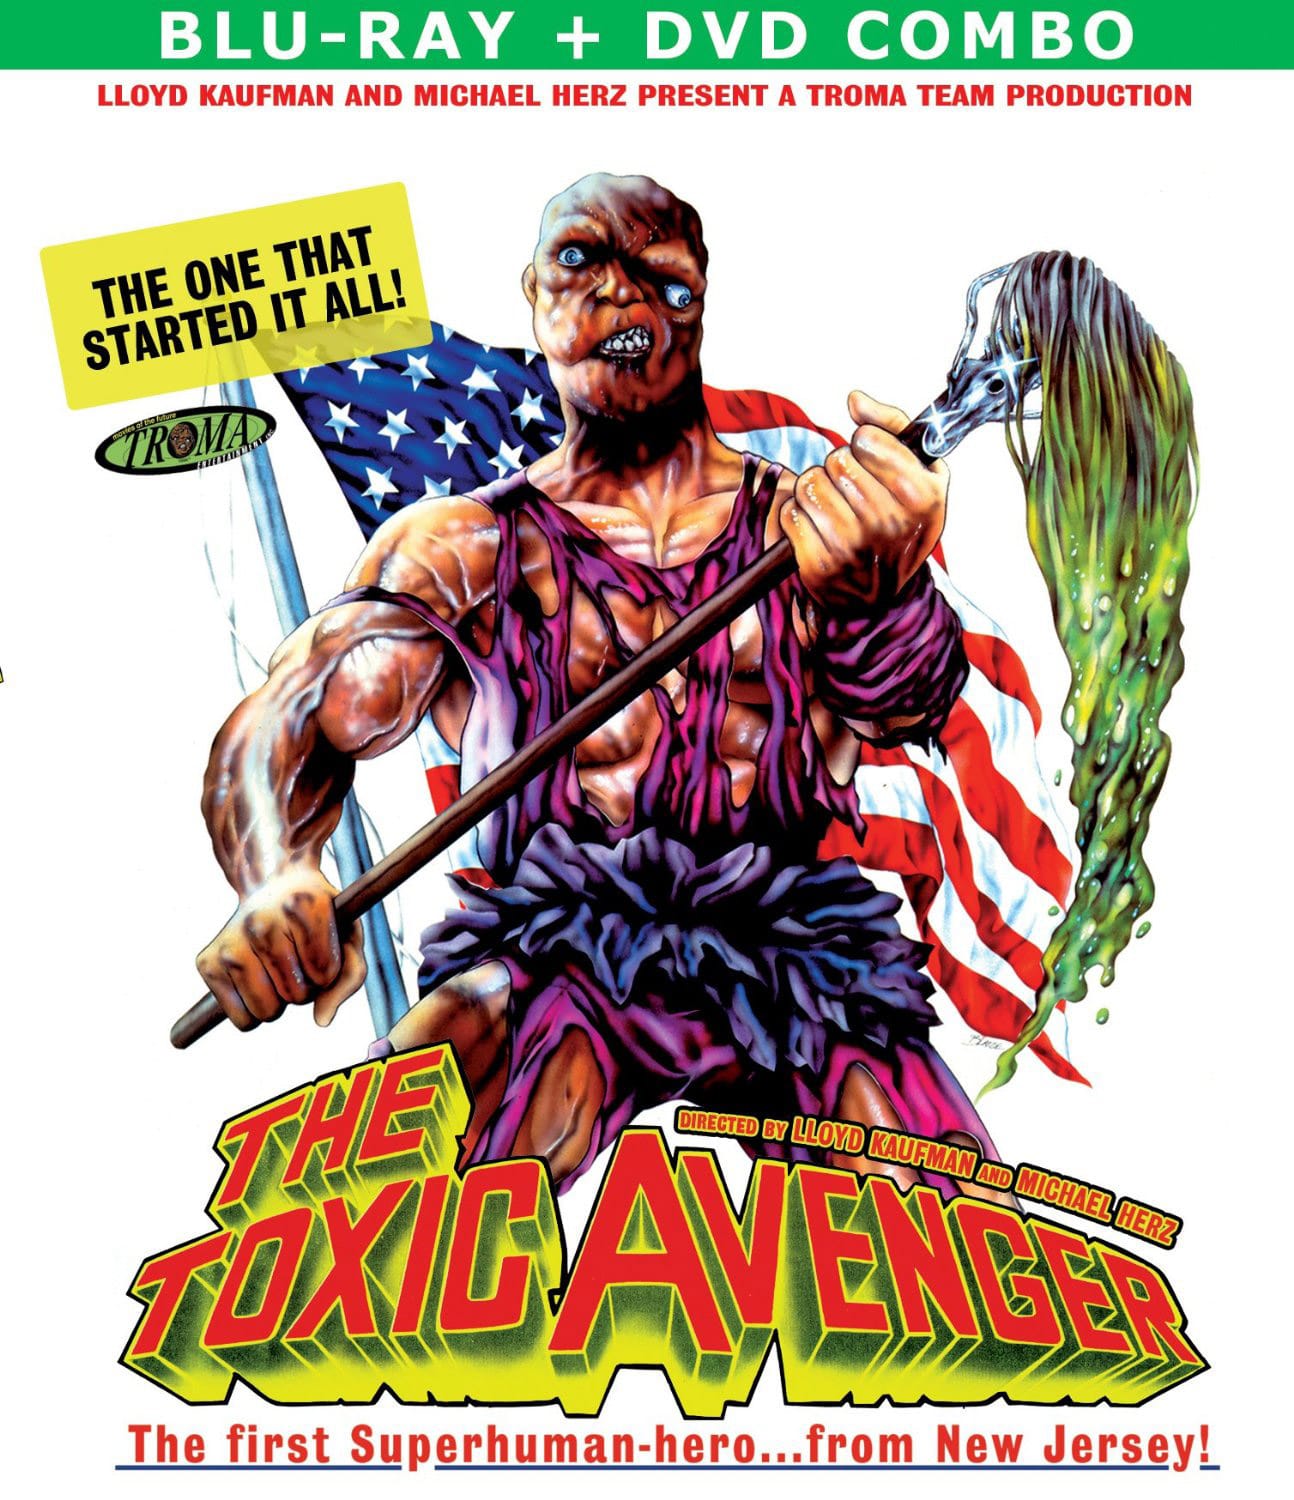 The Toxic Avenger on Blu-ray